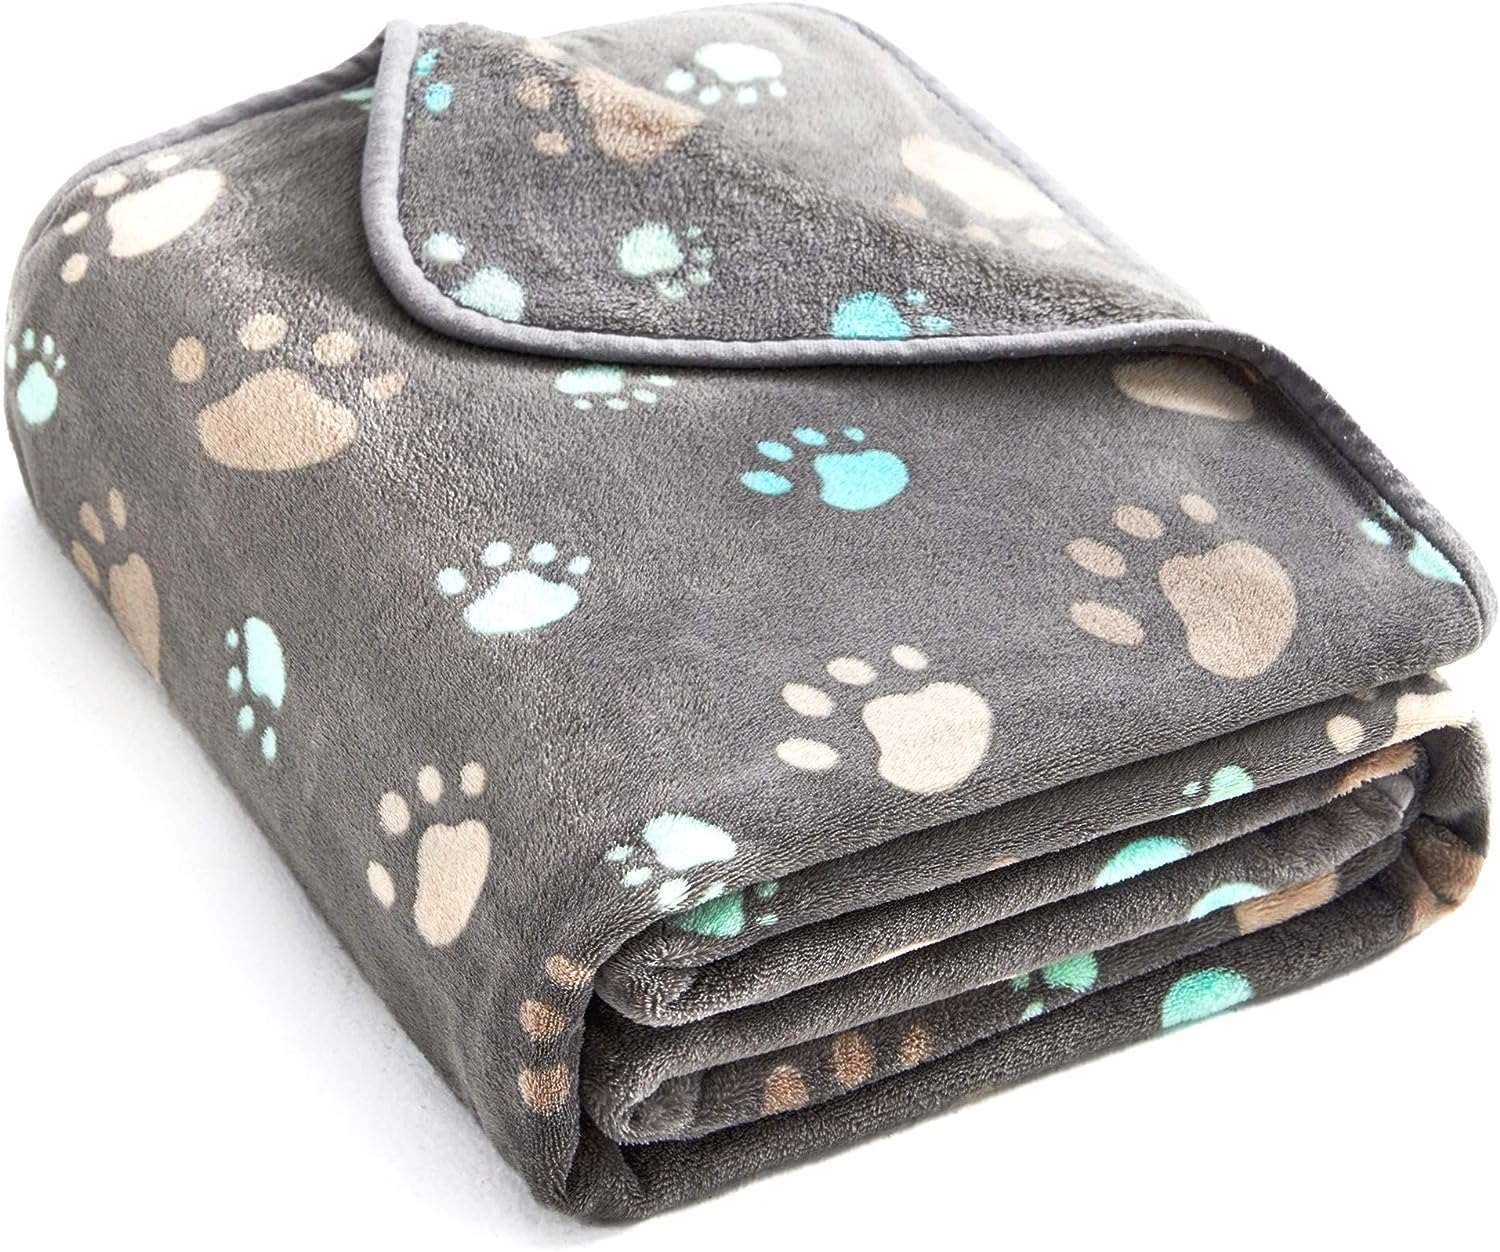 KUTKUT 350 GSM Luxurious Dog Blanket, Super Soft Warm Fluffy Microplush Flannel Pet Blanket for Small Medium Large Dogs and Cats, Warm Soft Sleep Mat for Pets Cage Liners Blanket-Blanket-kutkutstyle